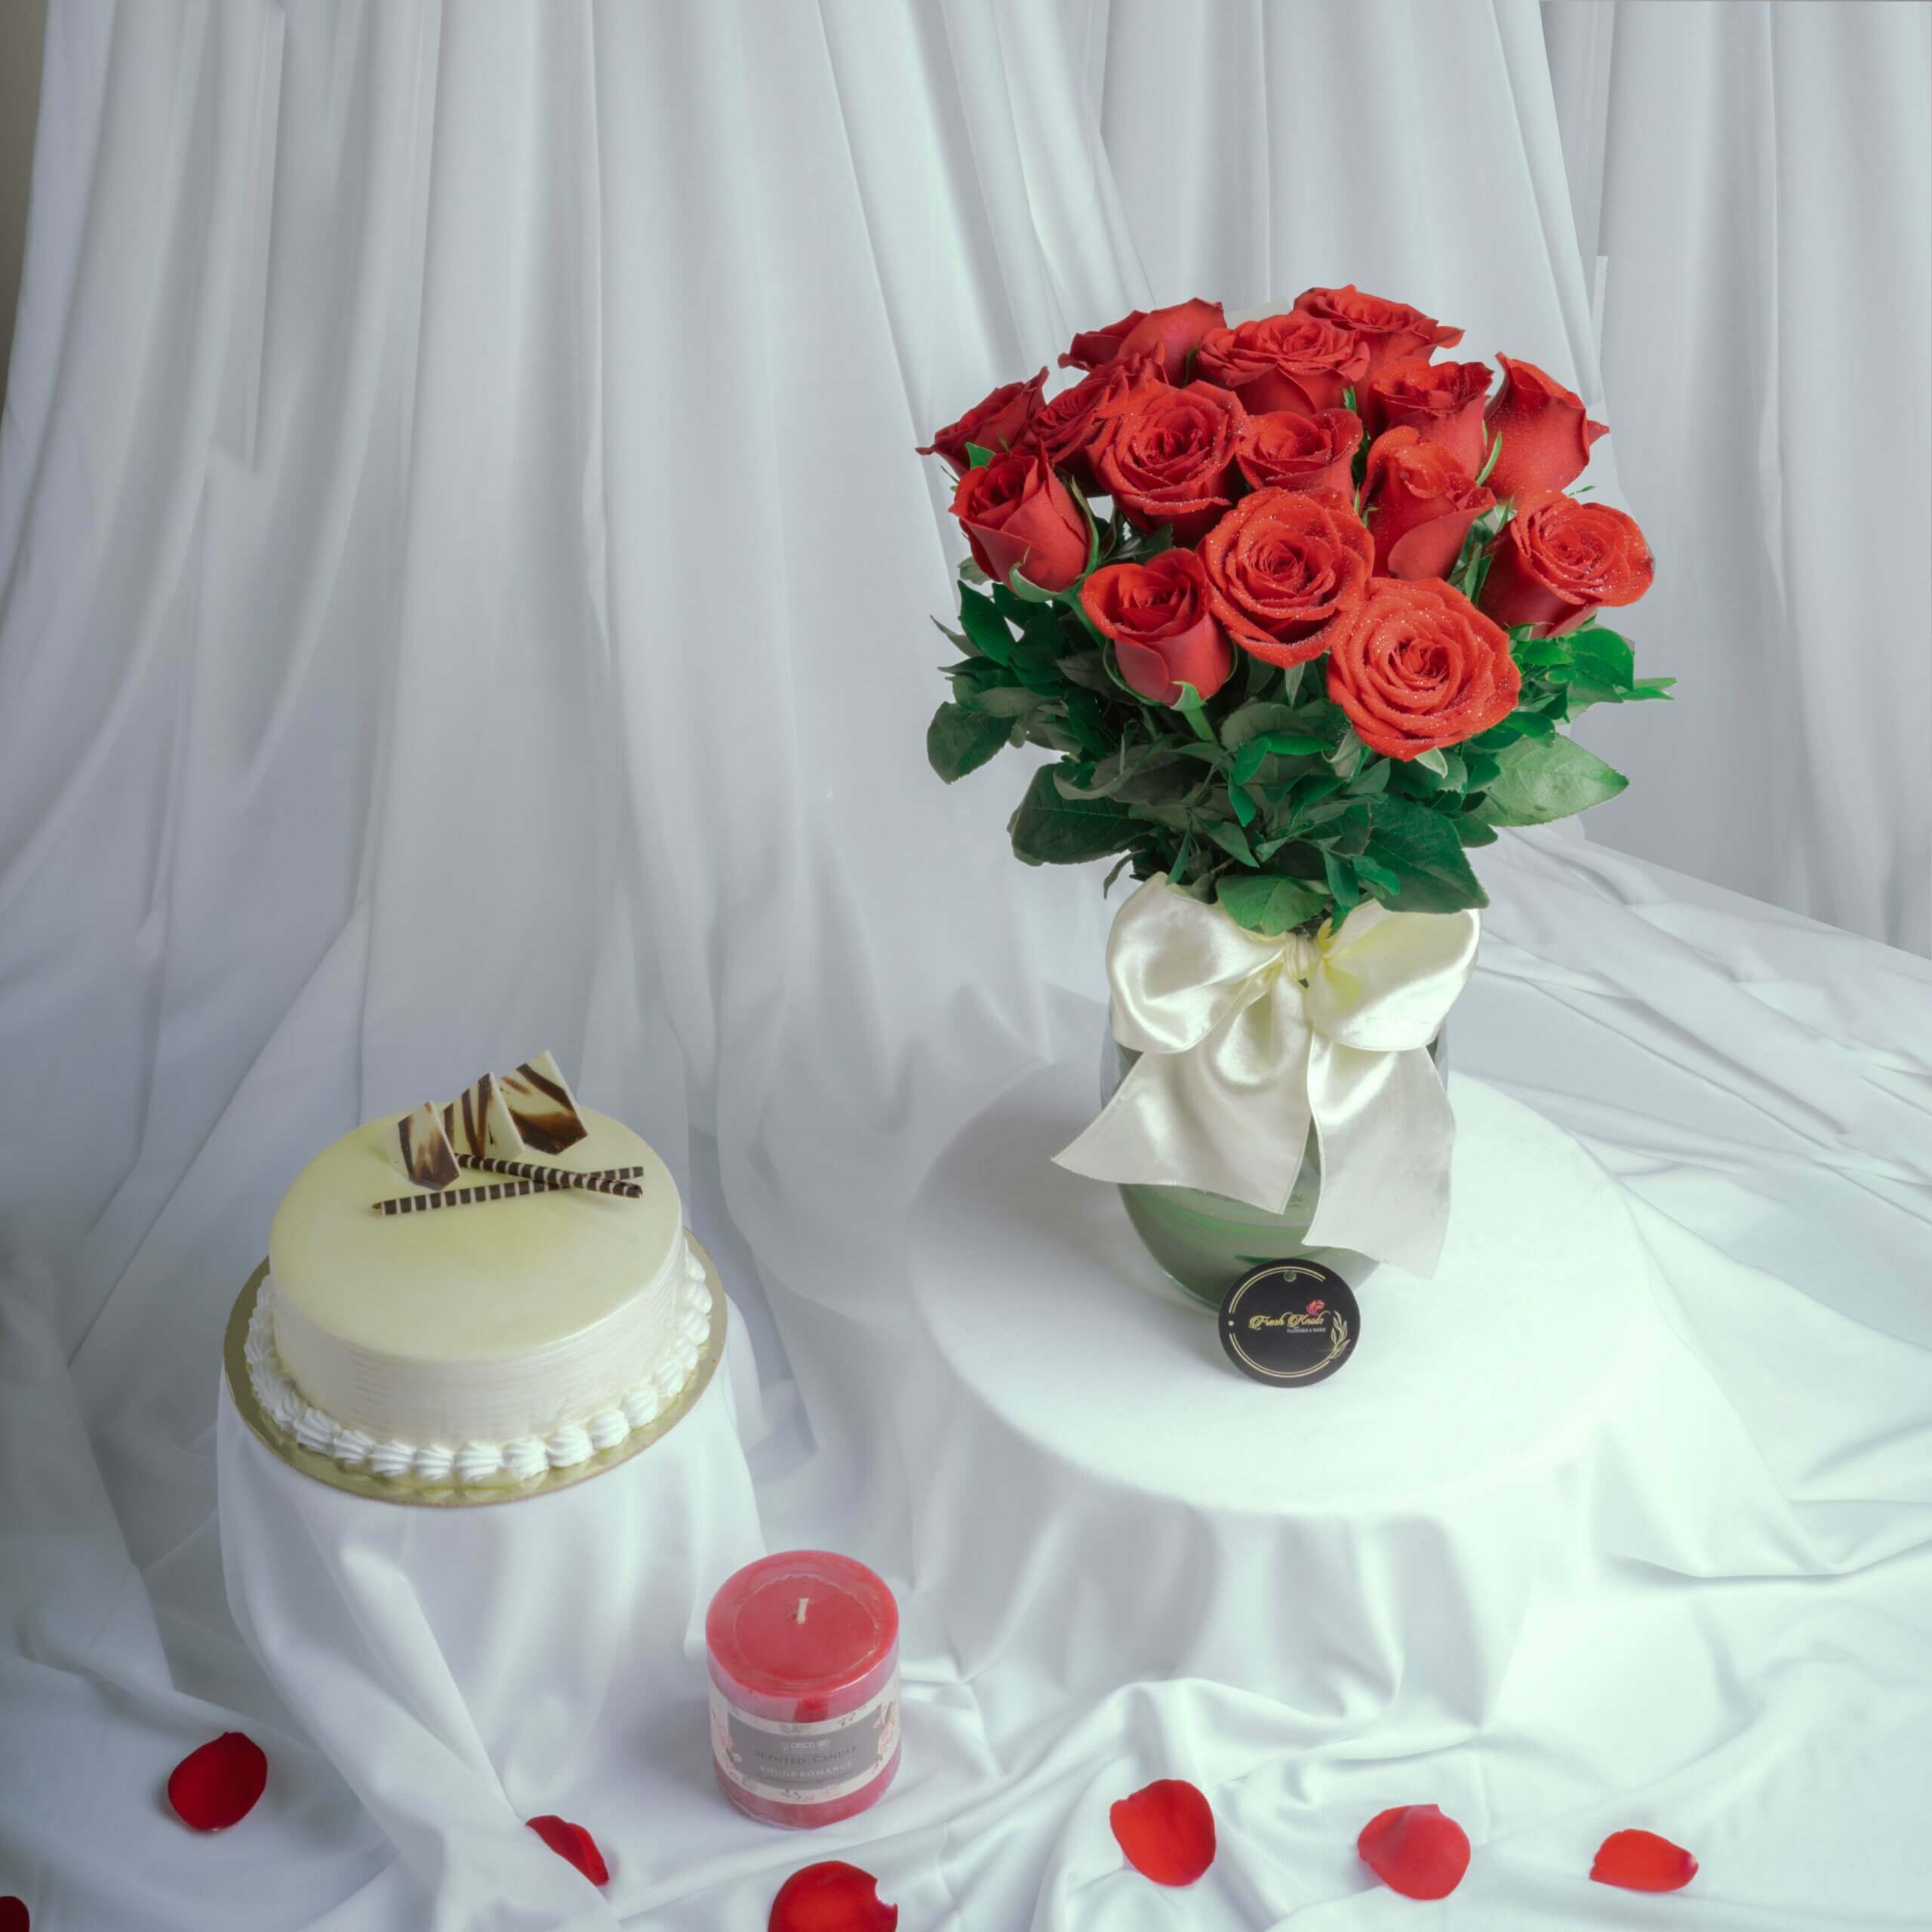 Roses-In-A-Vase-With-Cake (1)